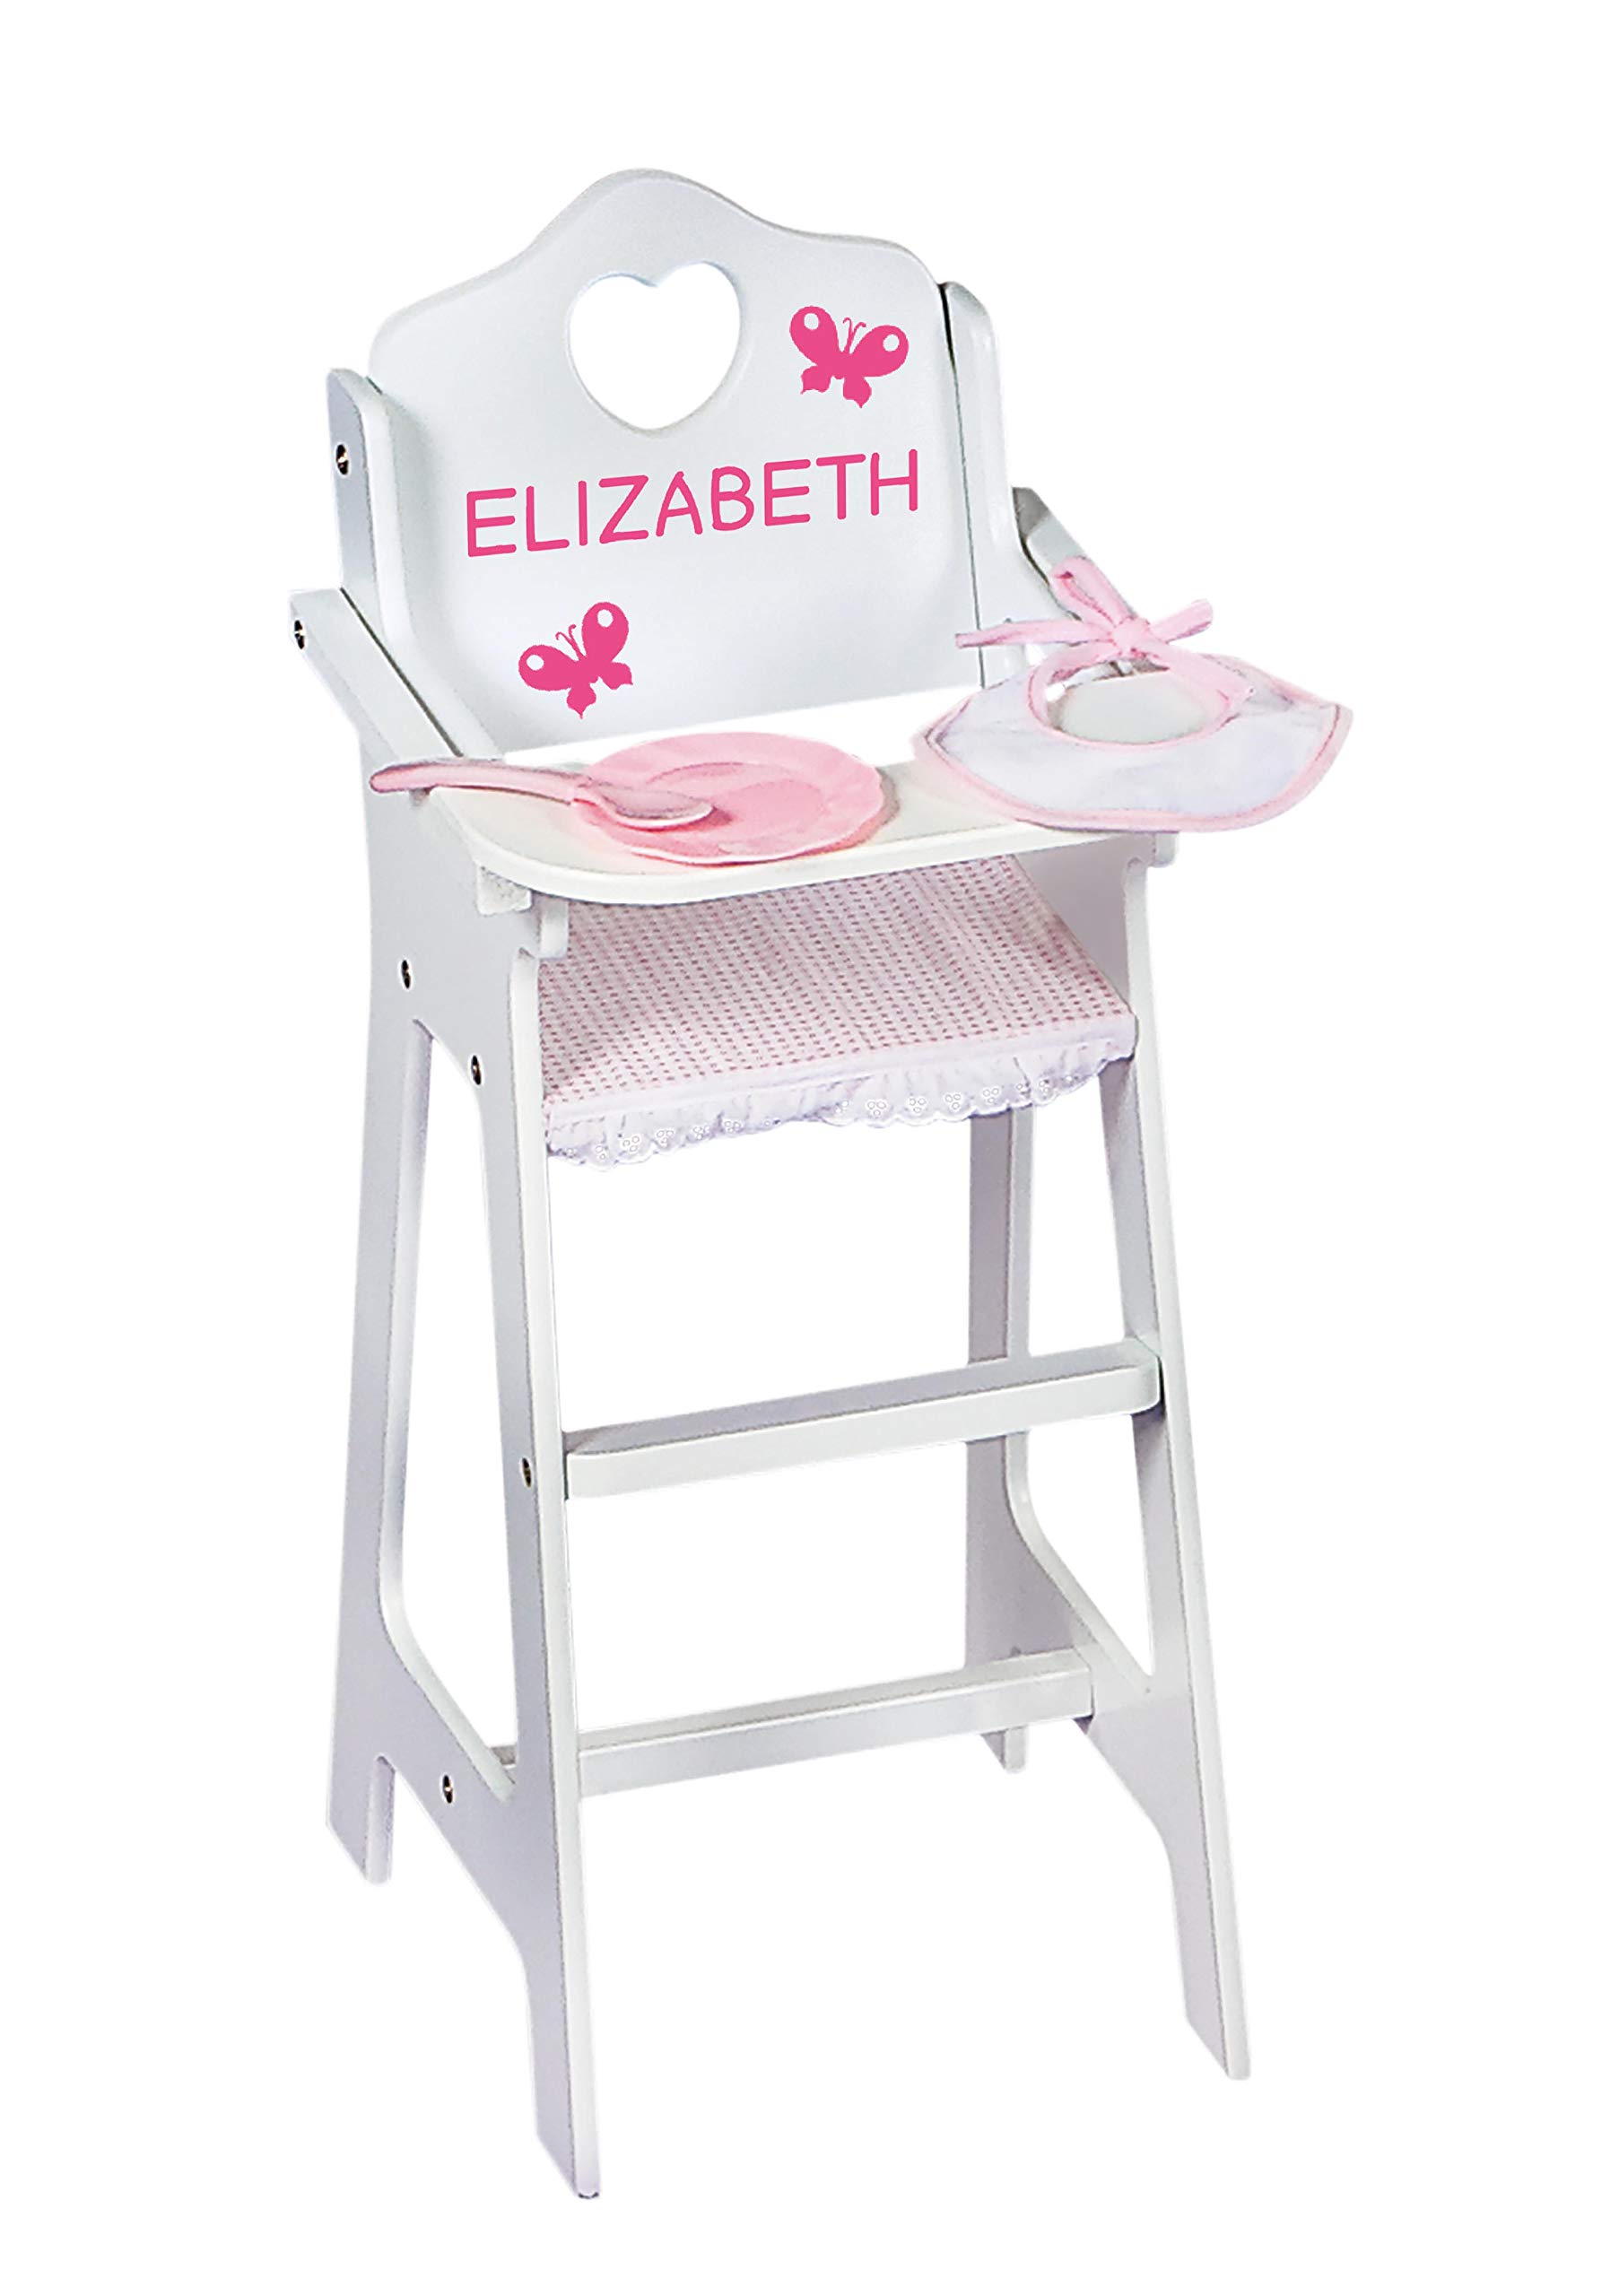 Badger Basket White Doll High Chair with Plate, Bib, and Spoon (fits American Girl dolls)